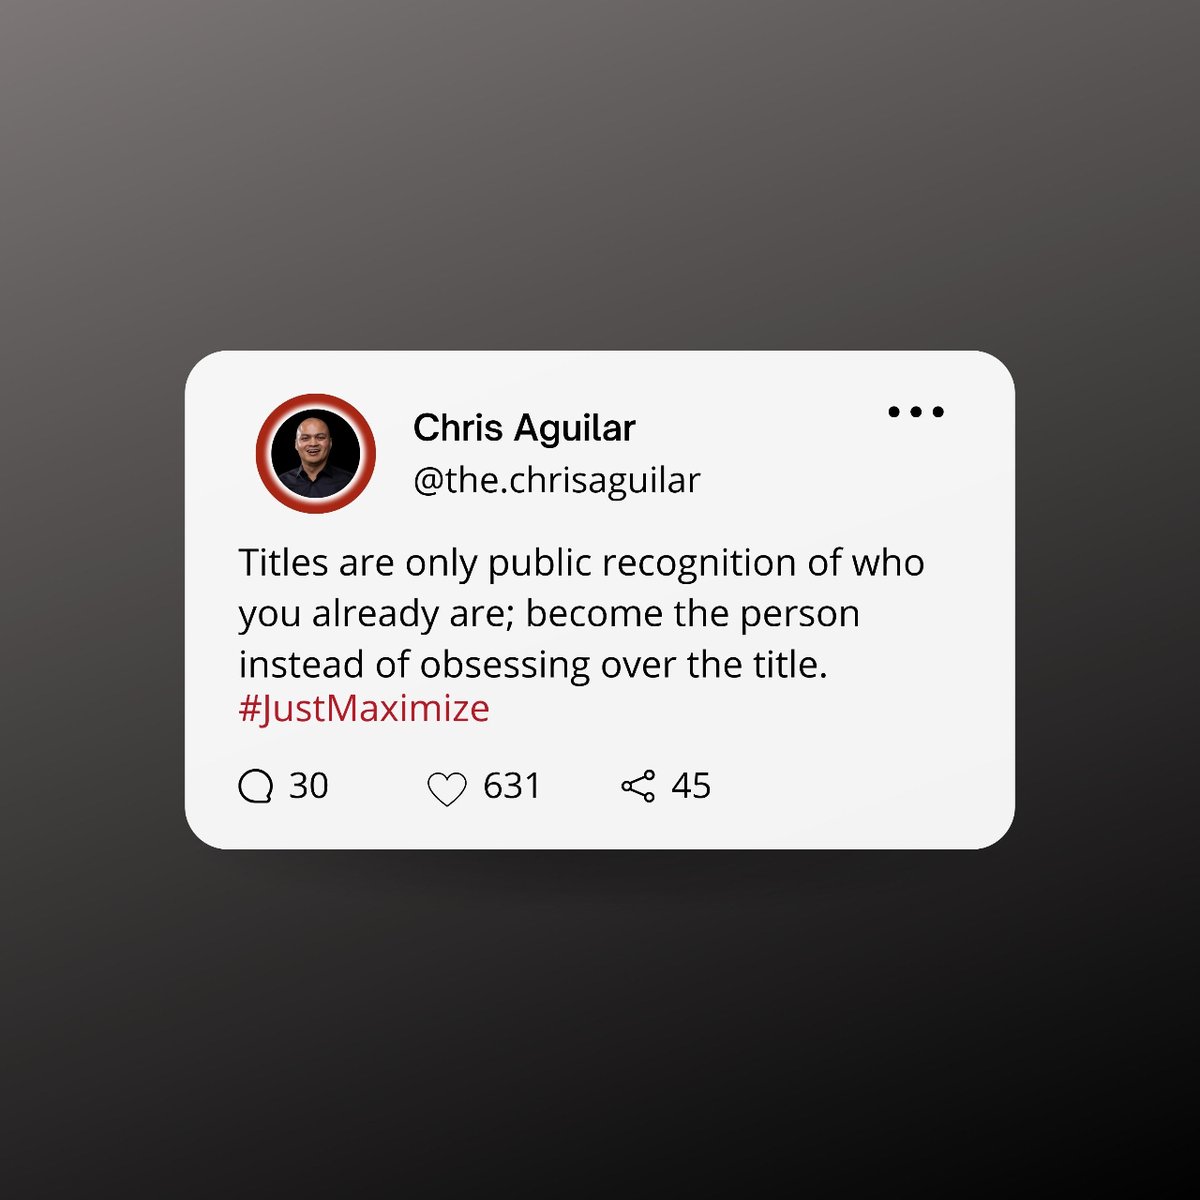 👏📈Titles are only public recognition of who you already are: become the person instead of obsessing over the title 💯📚 #realestate #investment #realestateagent #realestateinvesting #invest #investors #tca #motivationeveryday #smallbusiness #thechrisaguilar